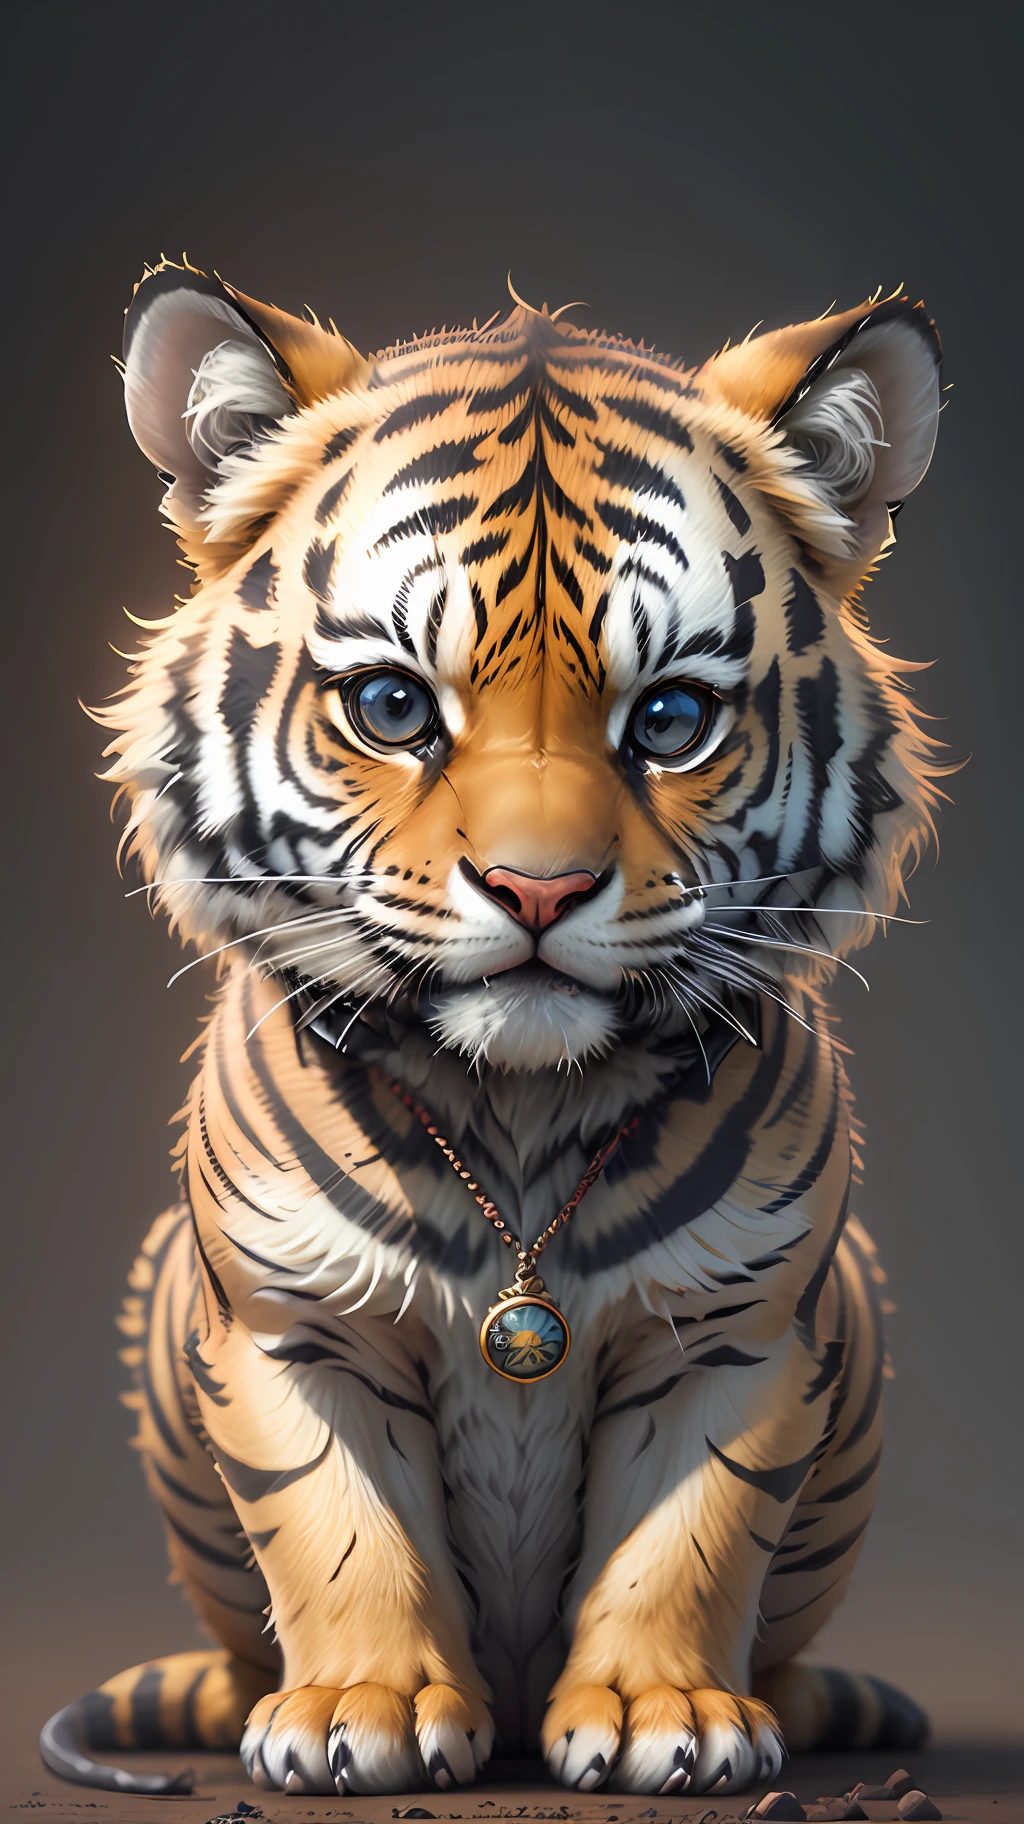 Cute hyper-realistic little tiger，Eyes of different colors，Wearing a necklace，tchibi，Lovely and fluffy，Logo design，cartoony，movie light effect，big breasts enchanting，3D Vector Art，Cute quirky，Fantasy art，Background bokeh，handpainted，digitial painting，gentlesoftlighting，Isometric style，4K resolution，photoreal render，Highly detailed and clean，Vector Image，Photorealistic masterpiece，professional photoshooting，simple space background，flat white background，isometry，Vibrant vector